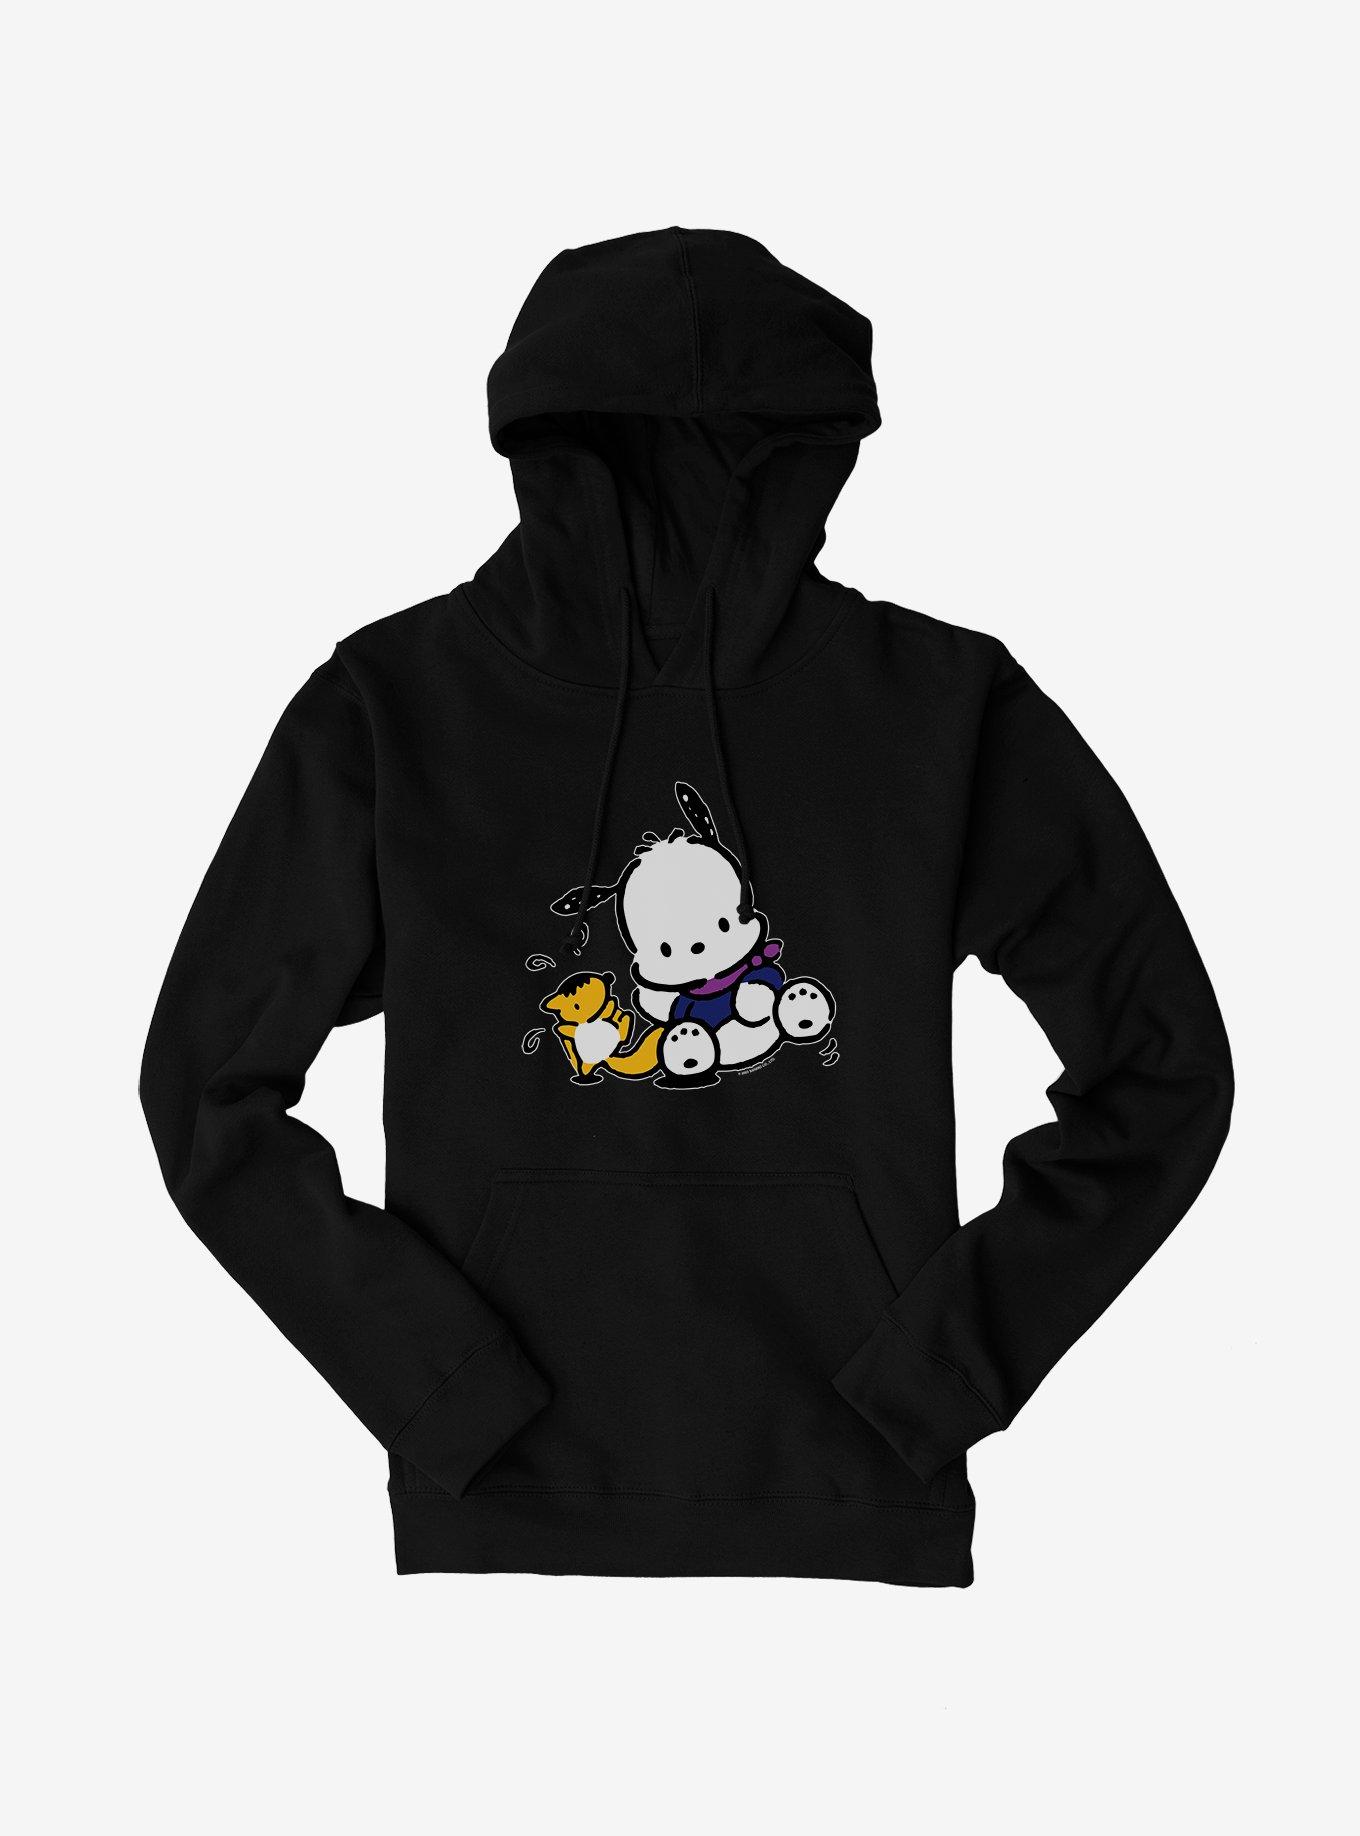 Pochacco Playing With Mon-Mon Hoodie